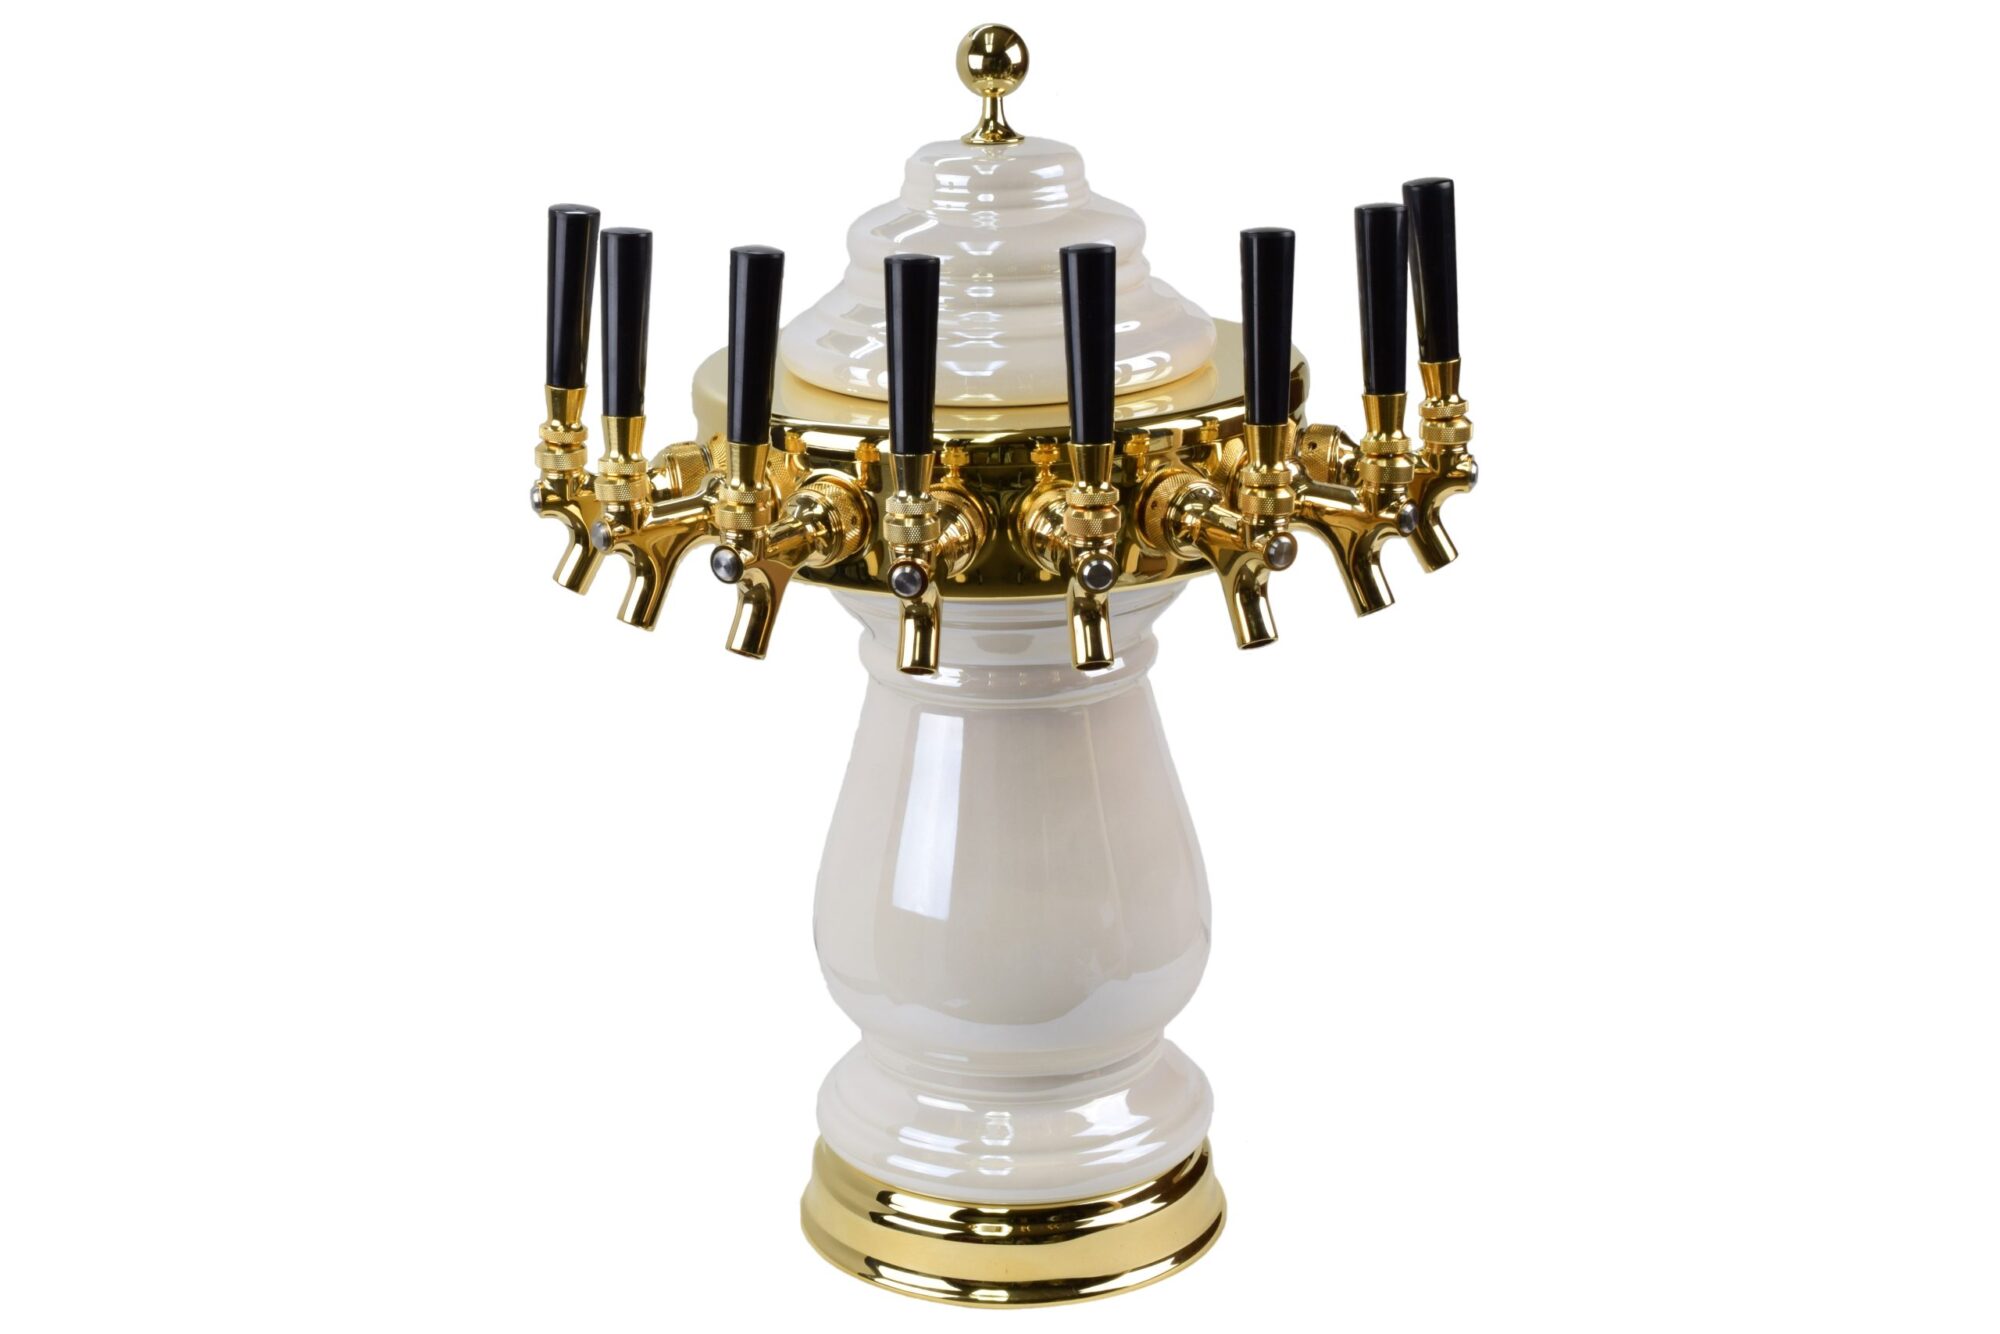 884B-8PW -- Eight Faucet Ceramic Tower with PVD Gold Hardware and Faucets - Shown in Pearl White